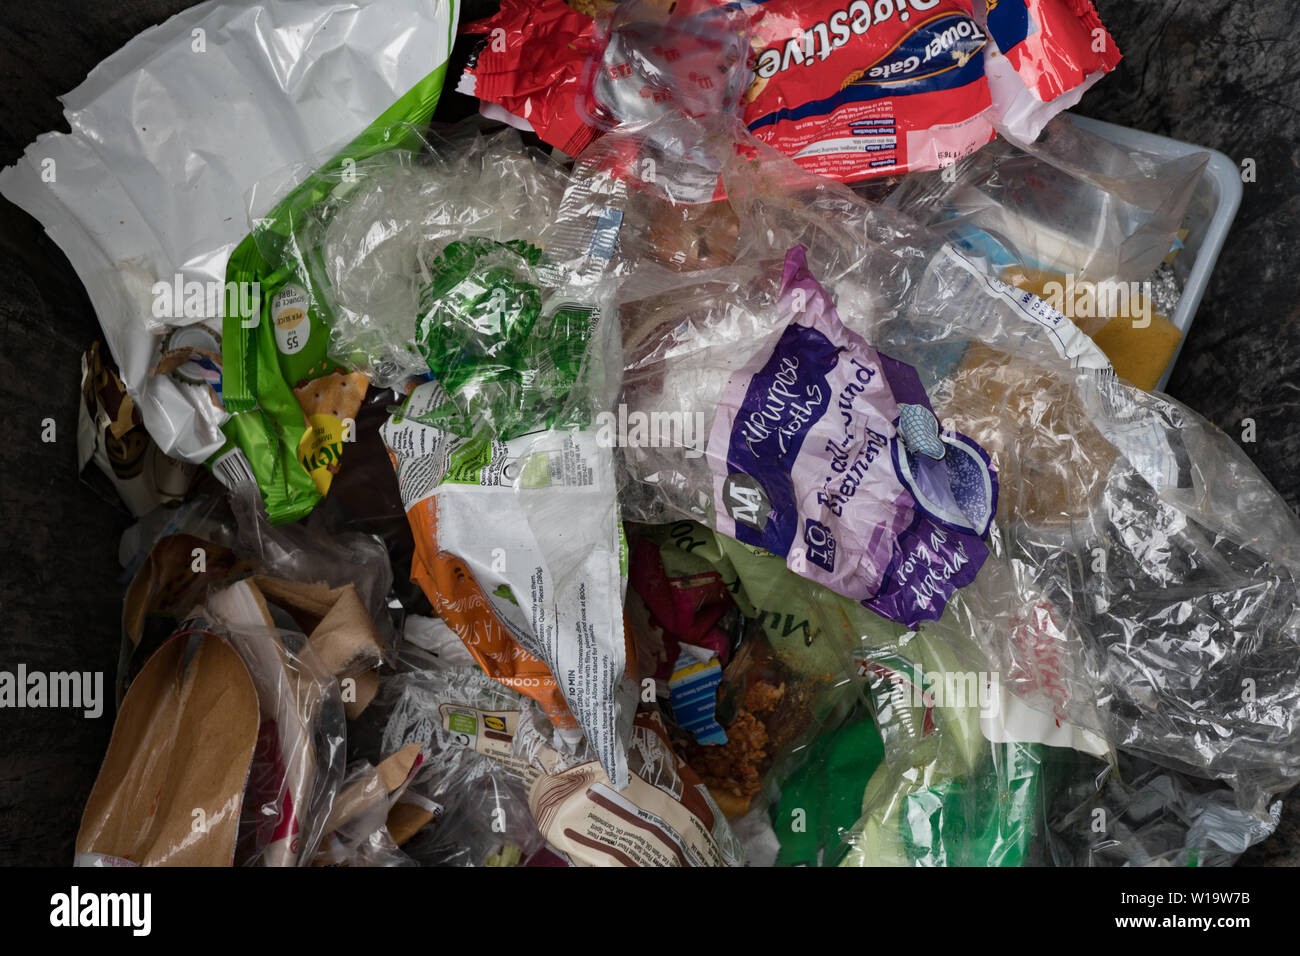 Rubbish, mailny non recyclable plastic food packaging, in household bin. UK Stock Photo